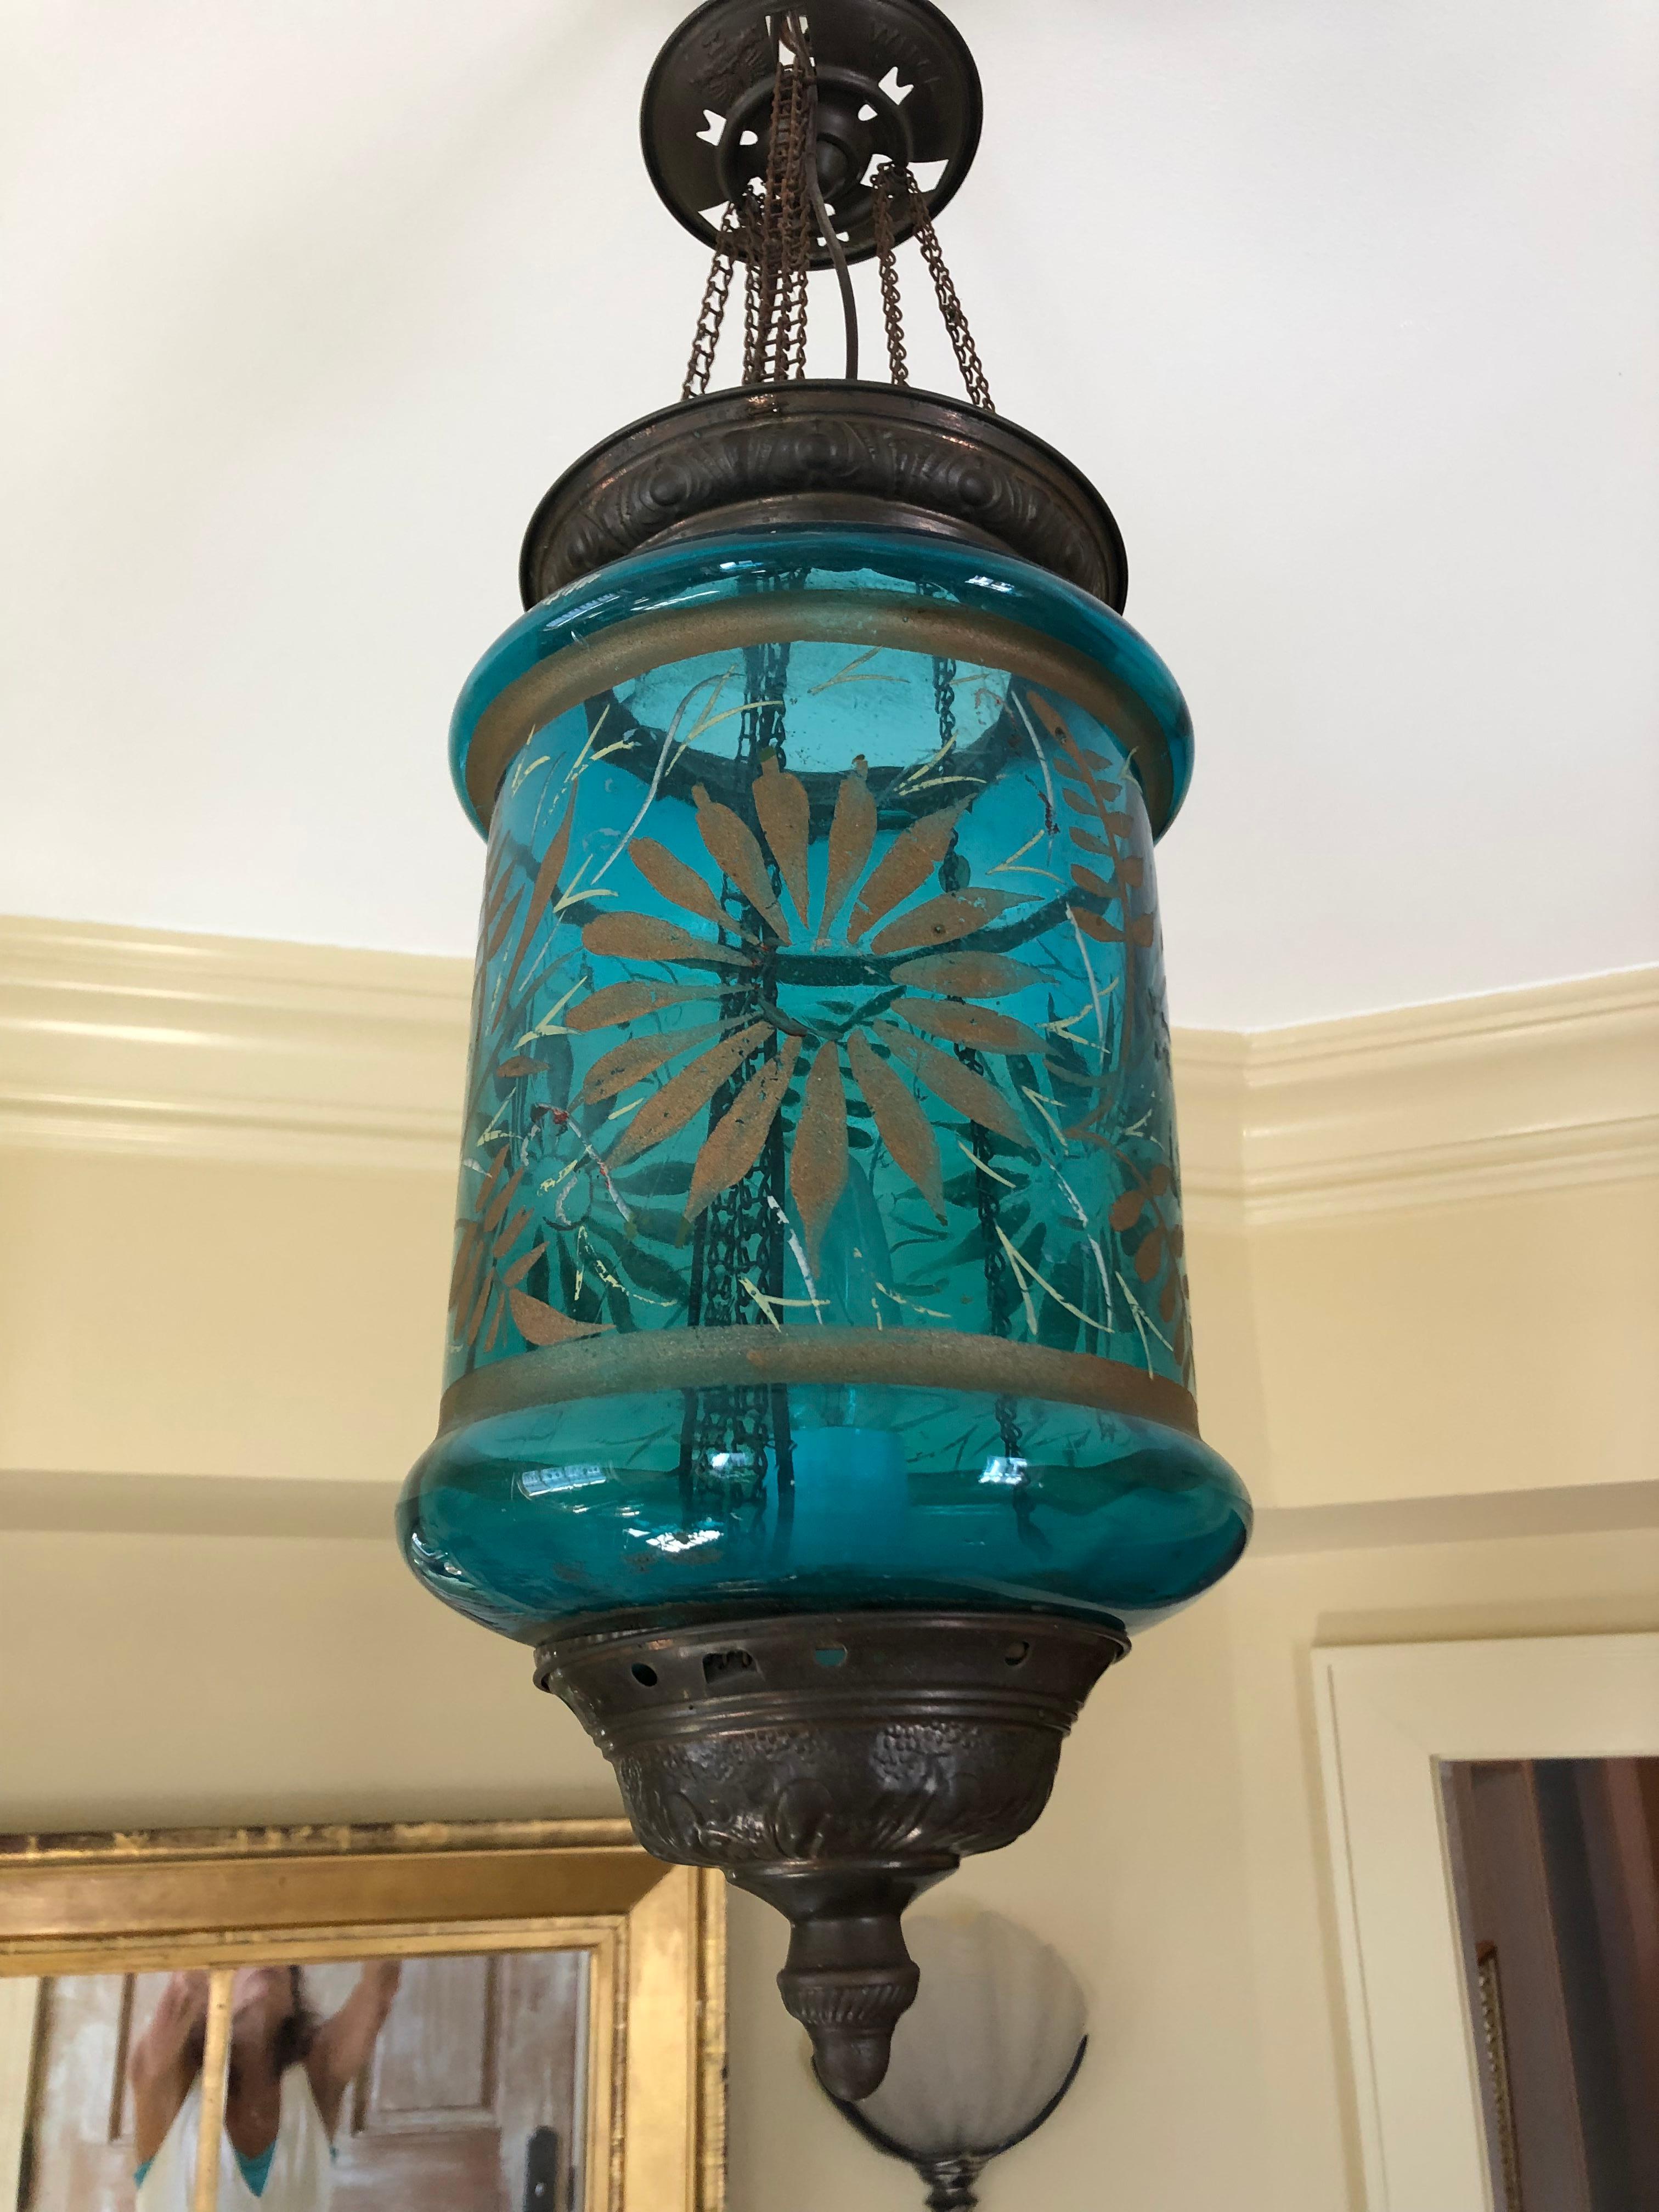 A wonderful antique turquoise glass lantern with floral decoration and bronze colored brass base, top, and original ceiling cap. Makes an eye catching lovely foyer fixture.